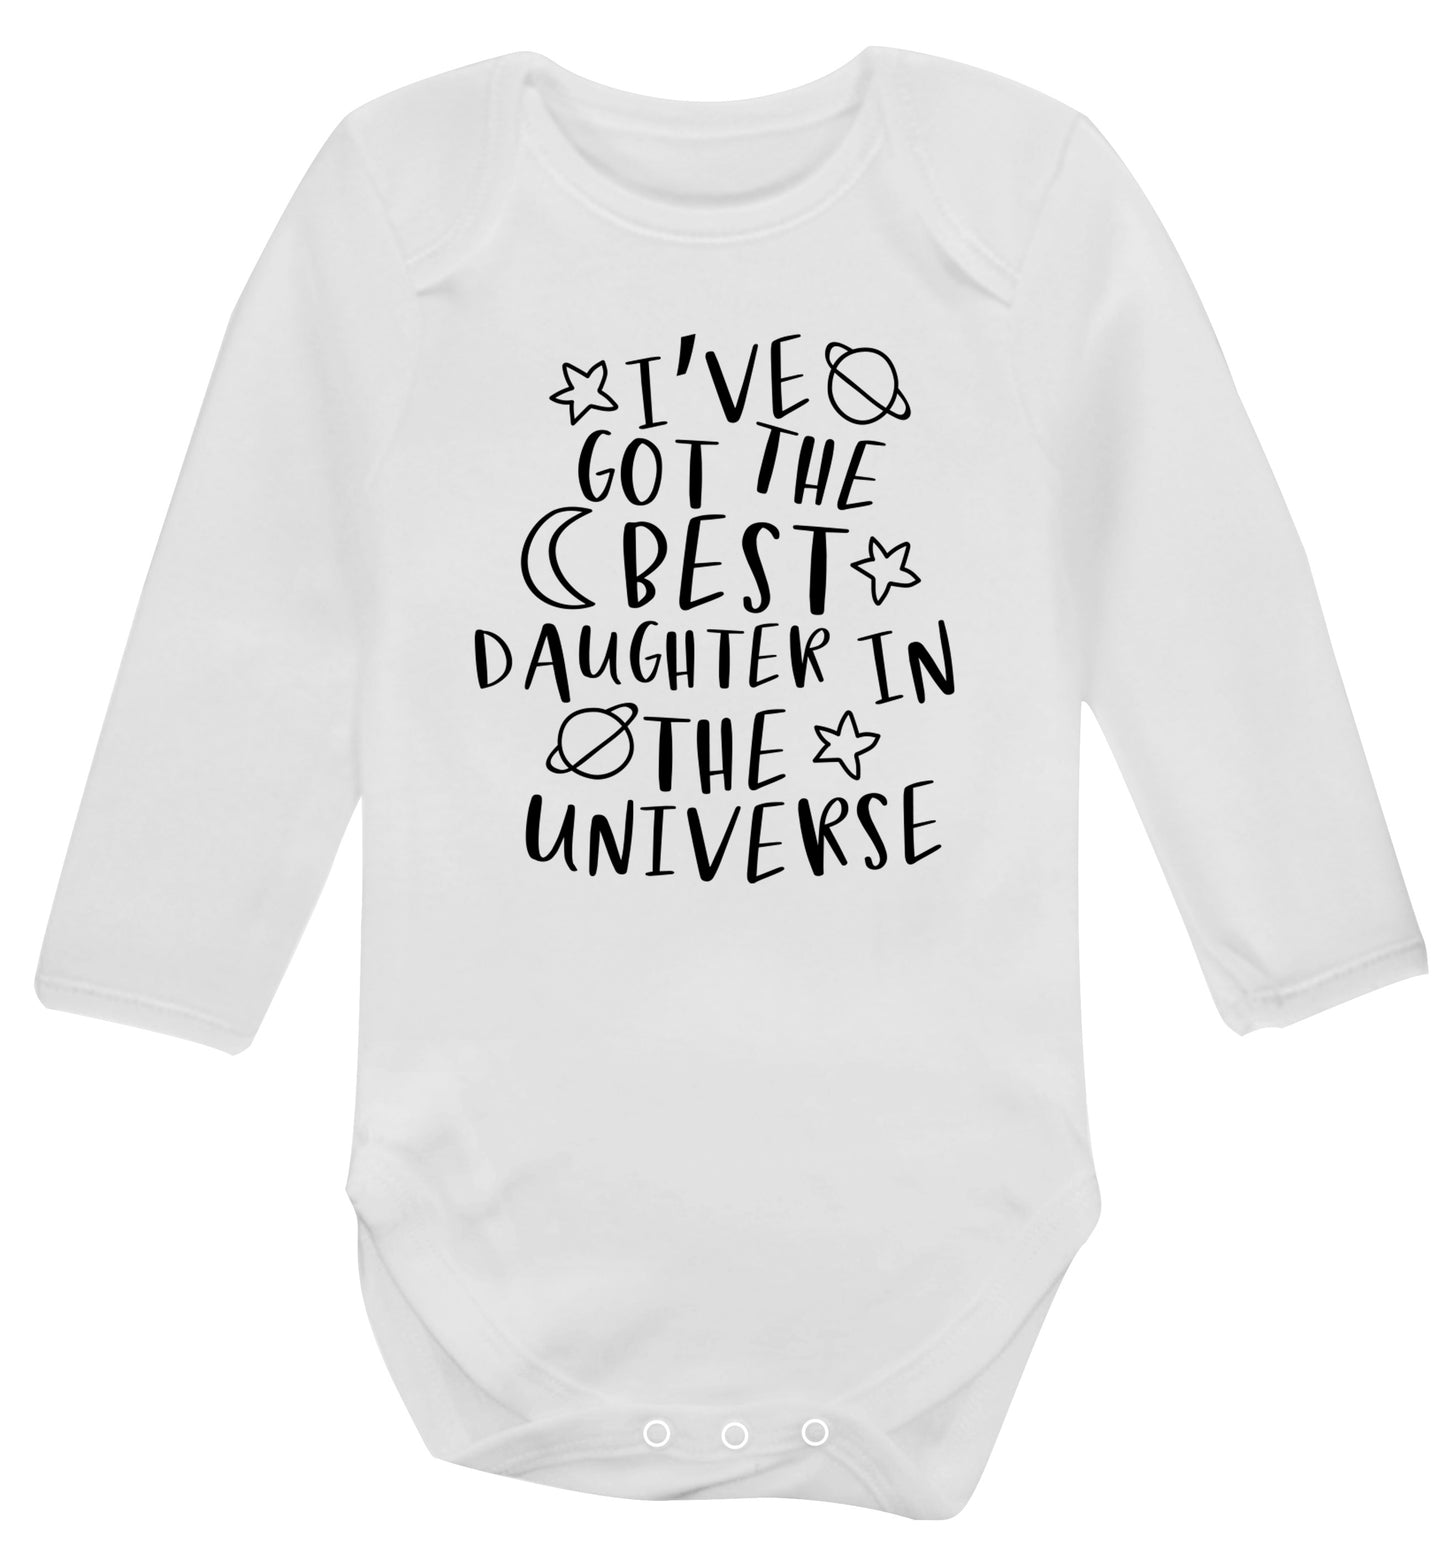 I've got the best daughter in the universe Baby Vest long sleeved white 6-12 months